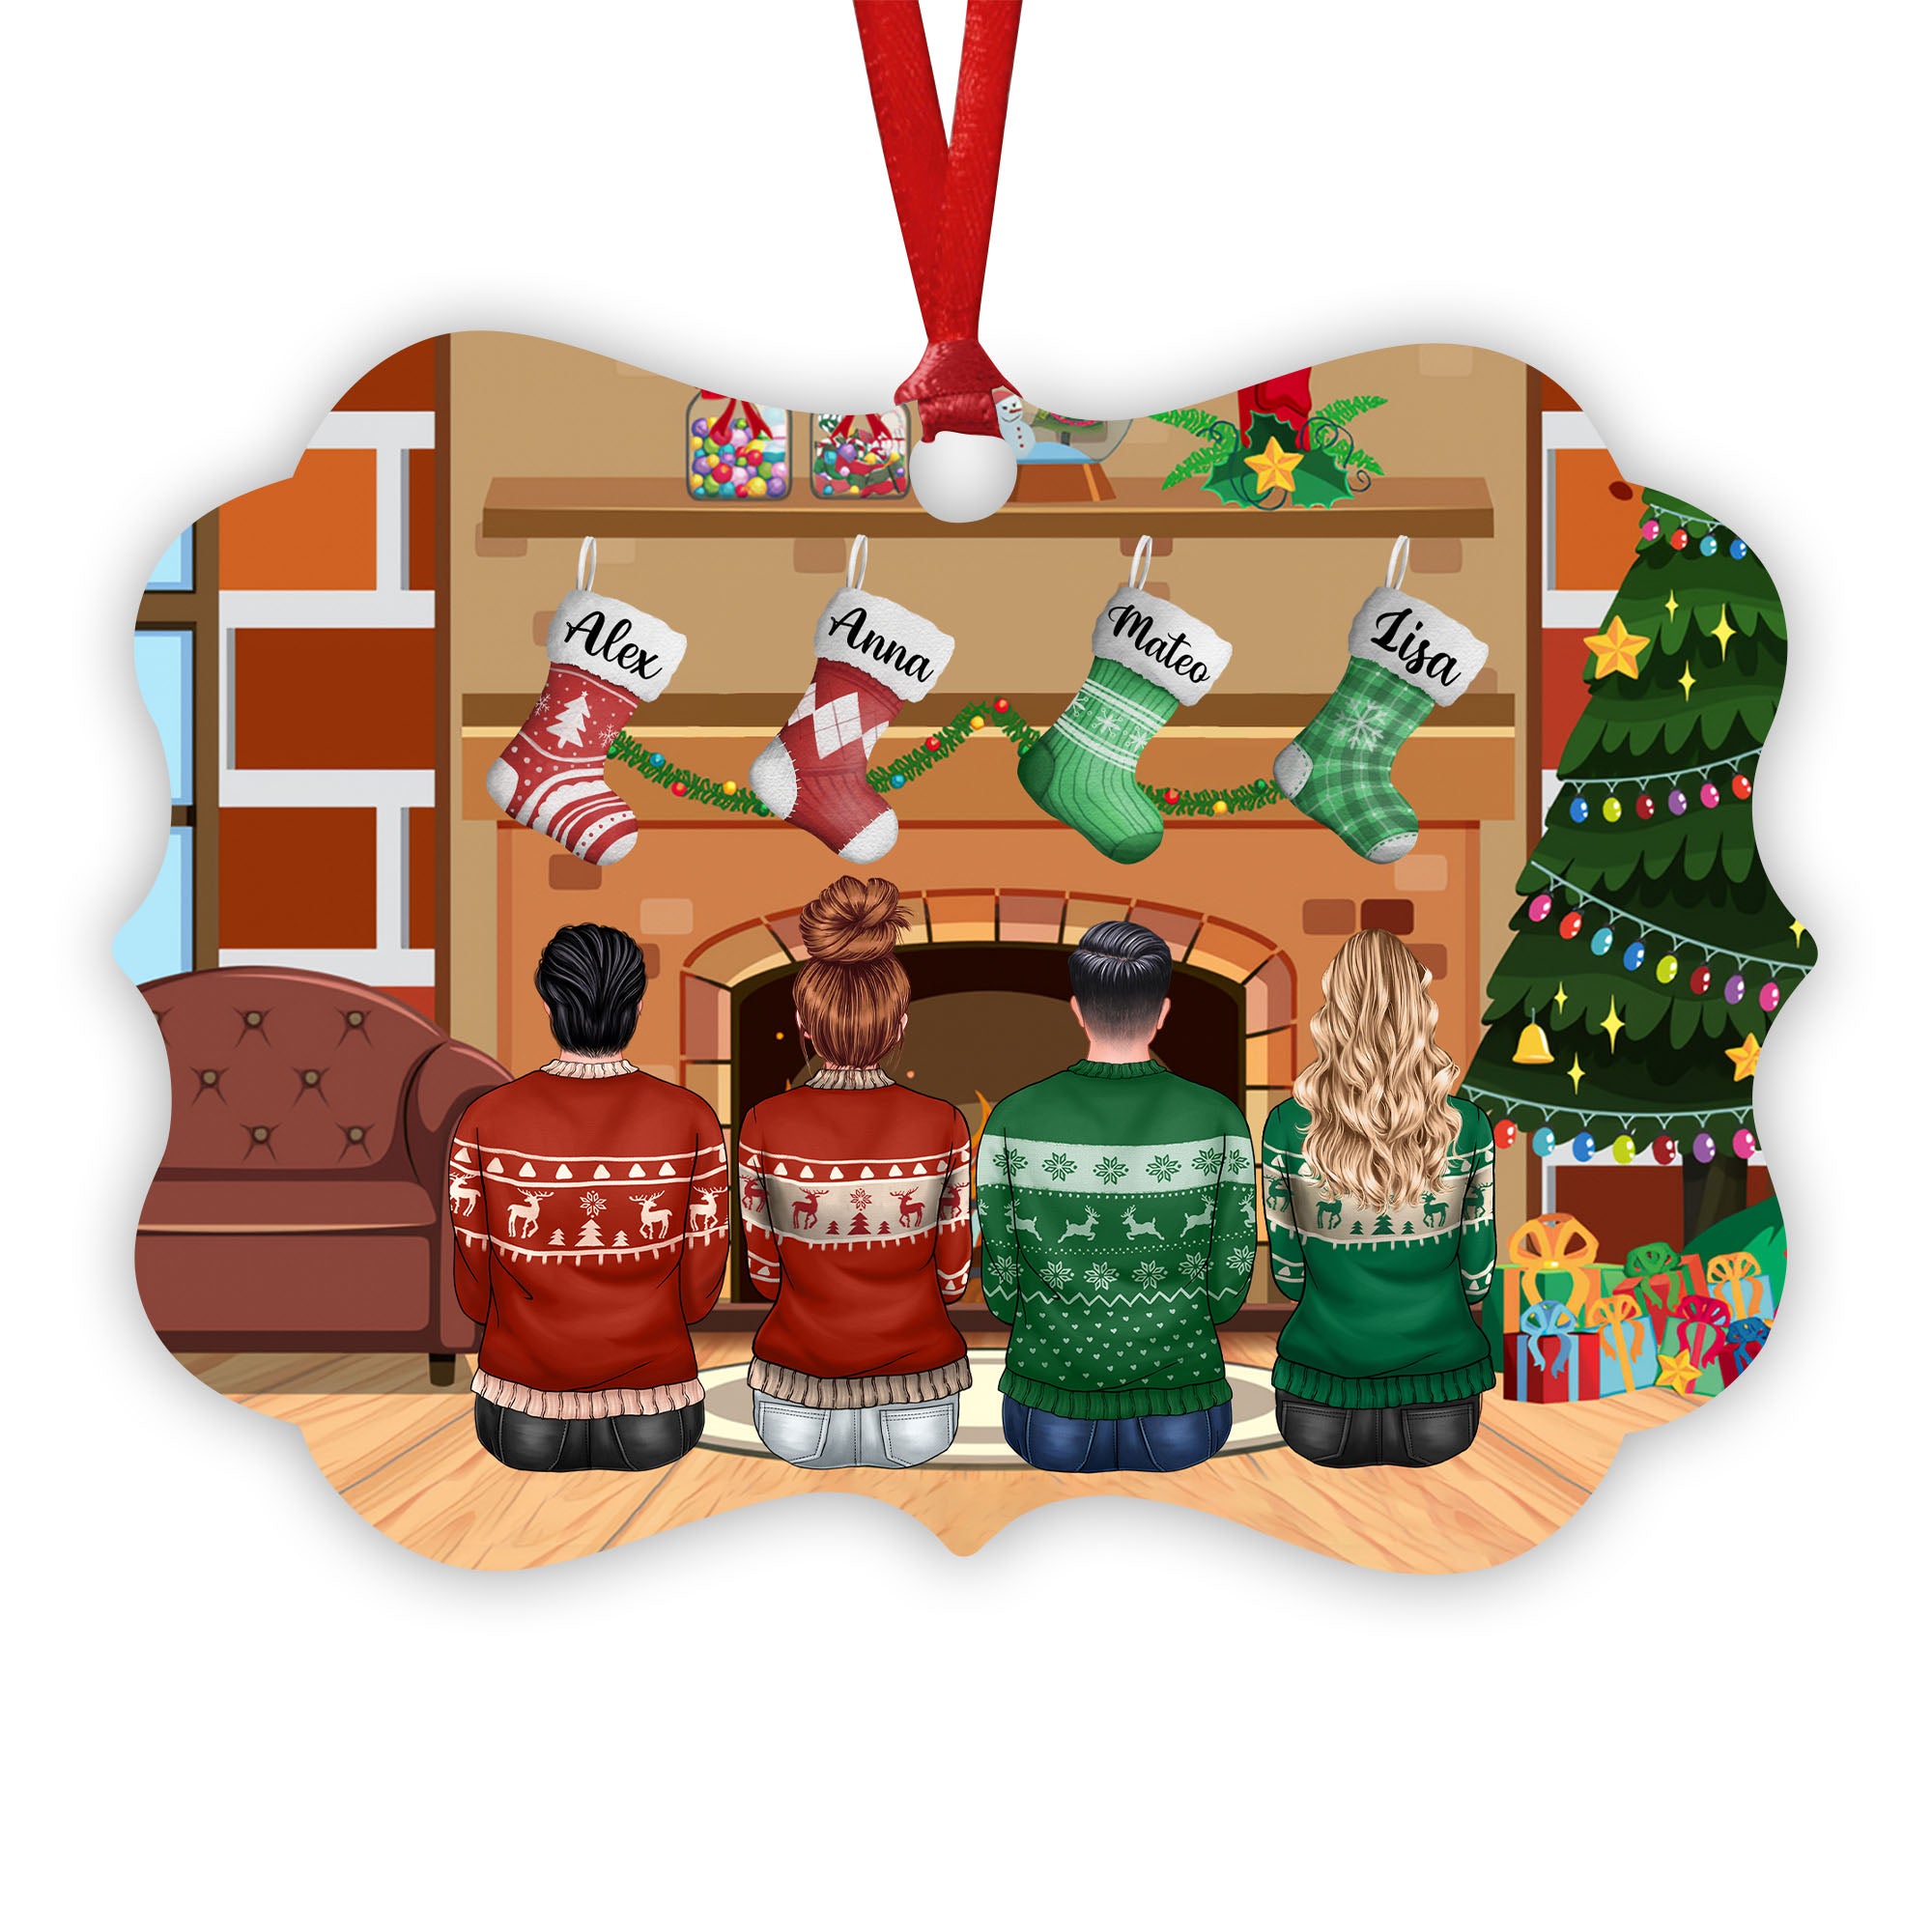 Family This Christmas The Stockings Were Hung Ornament - Personalized Aluminum Ornament